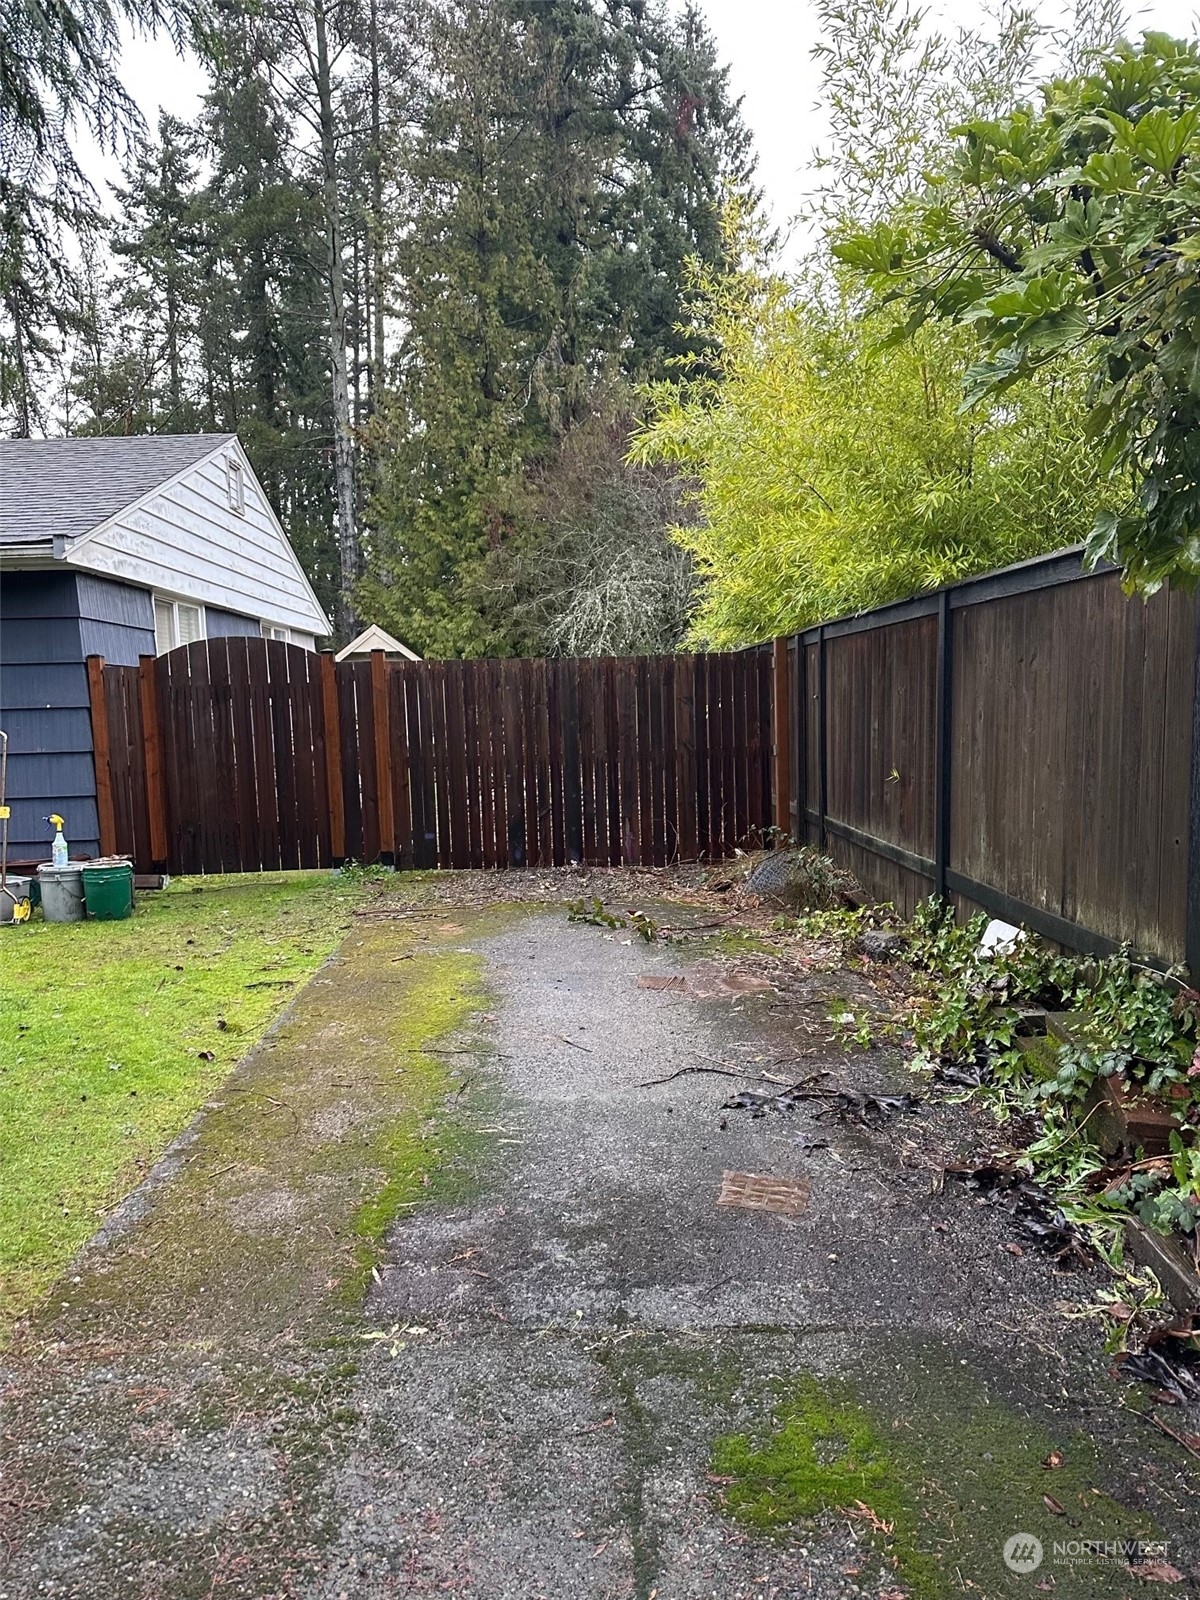 a view of small backyard with wooden fence